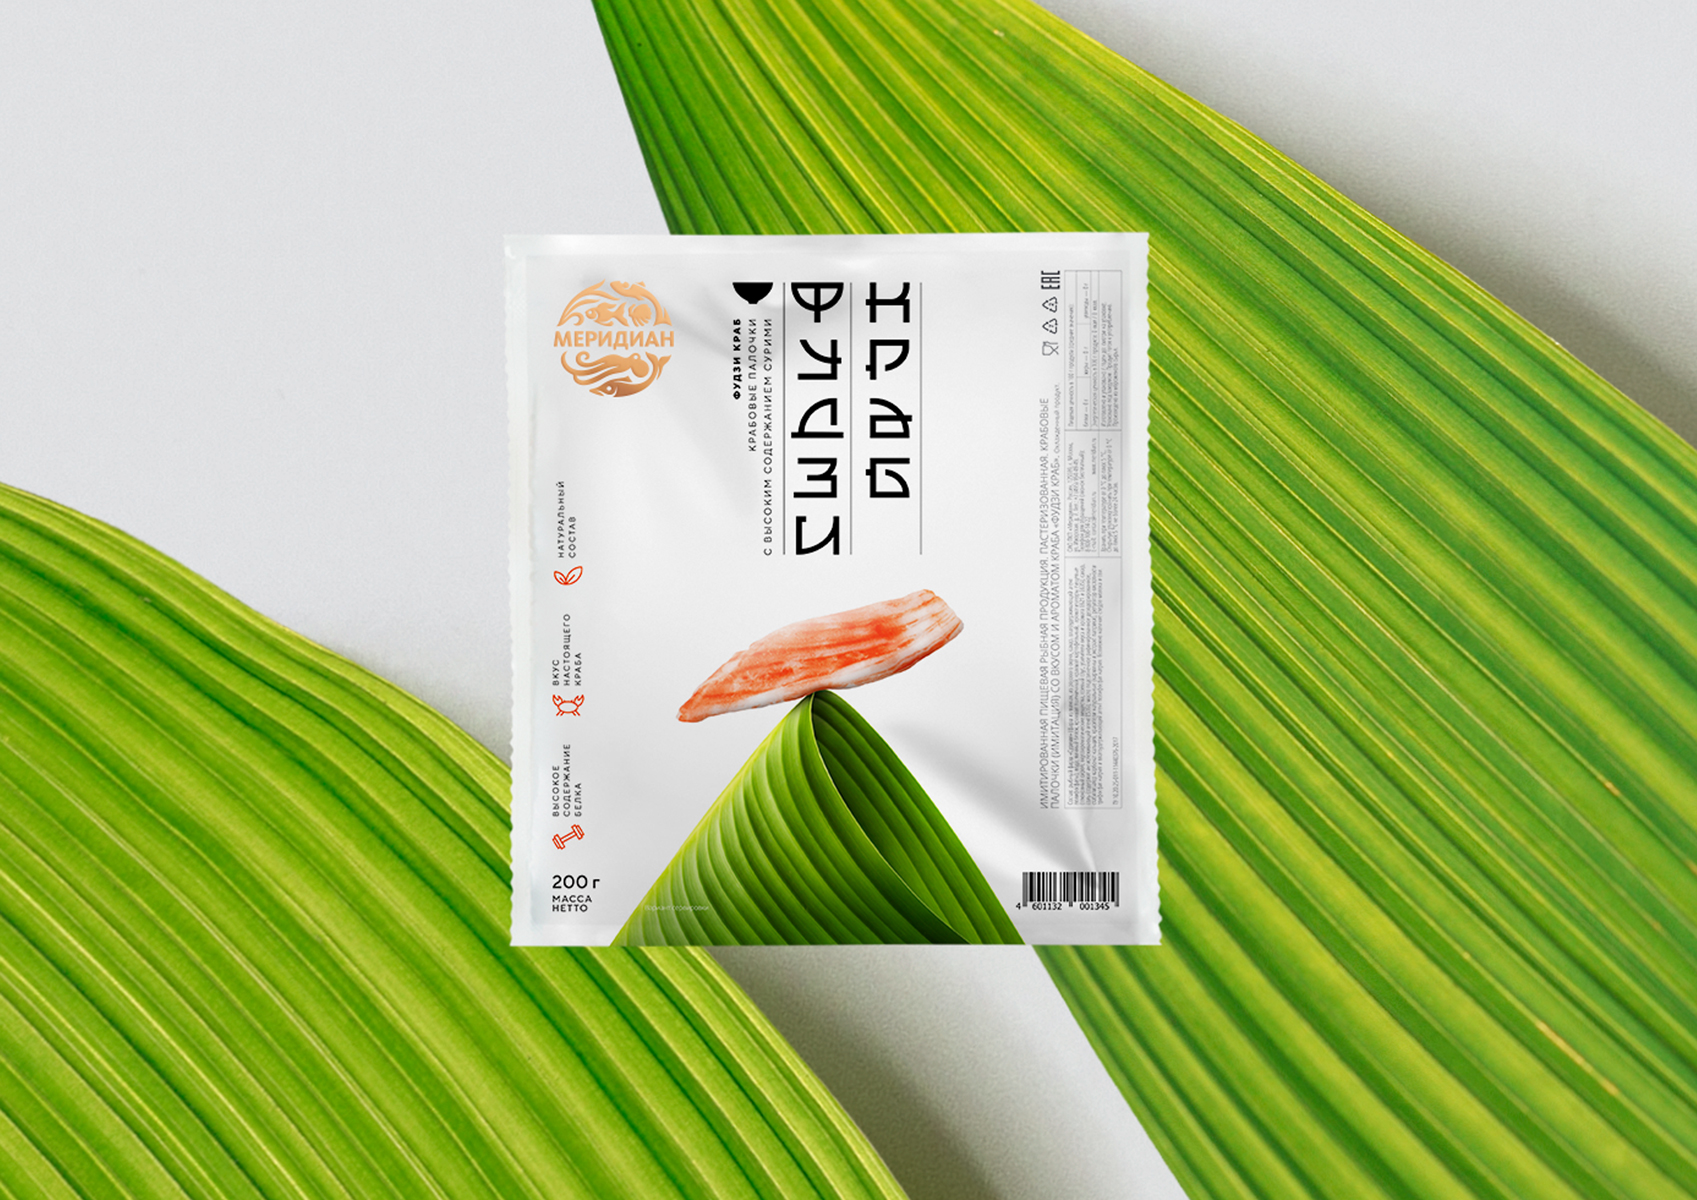 Ferma Branding Agency Create Packaging Design for the Snow Crab Product